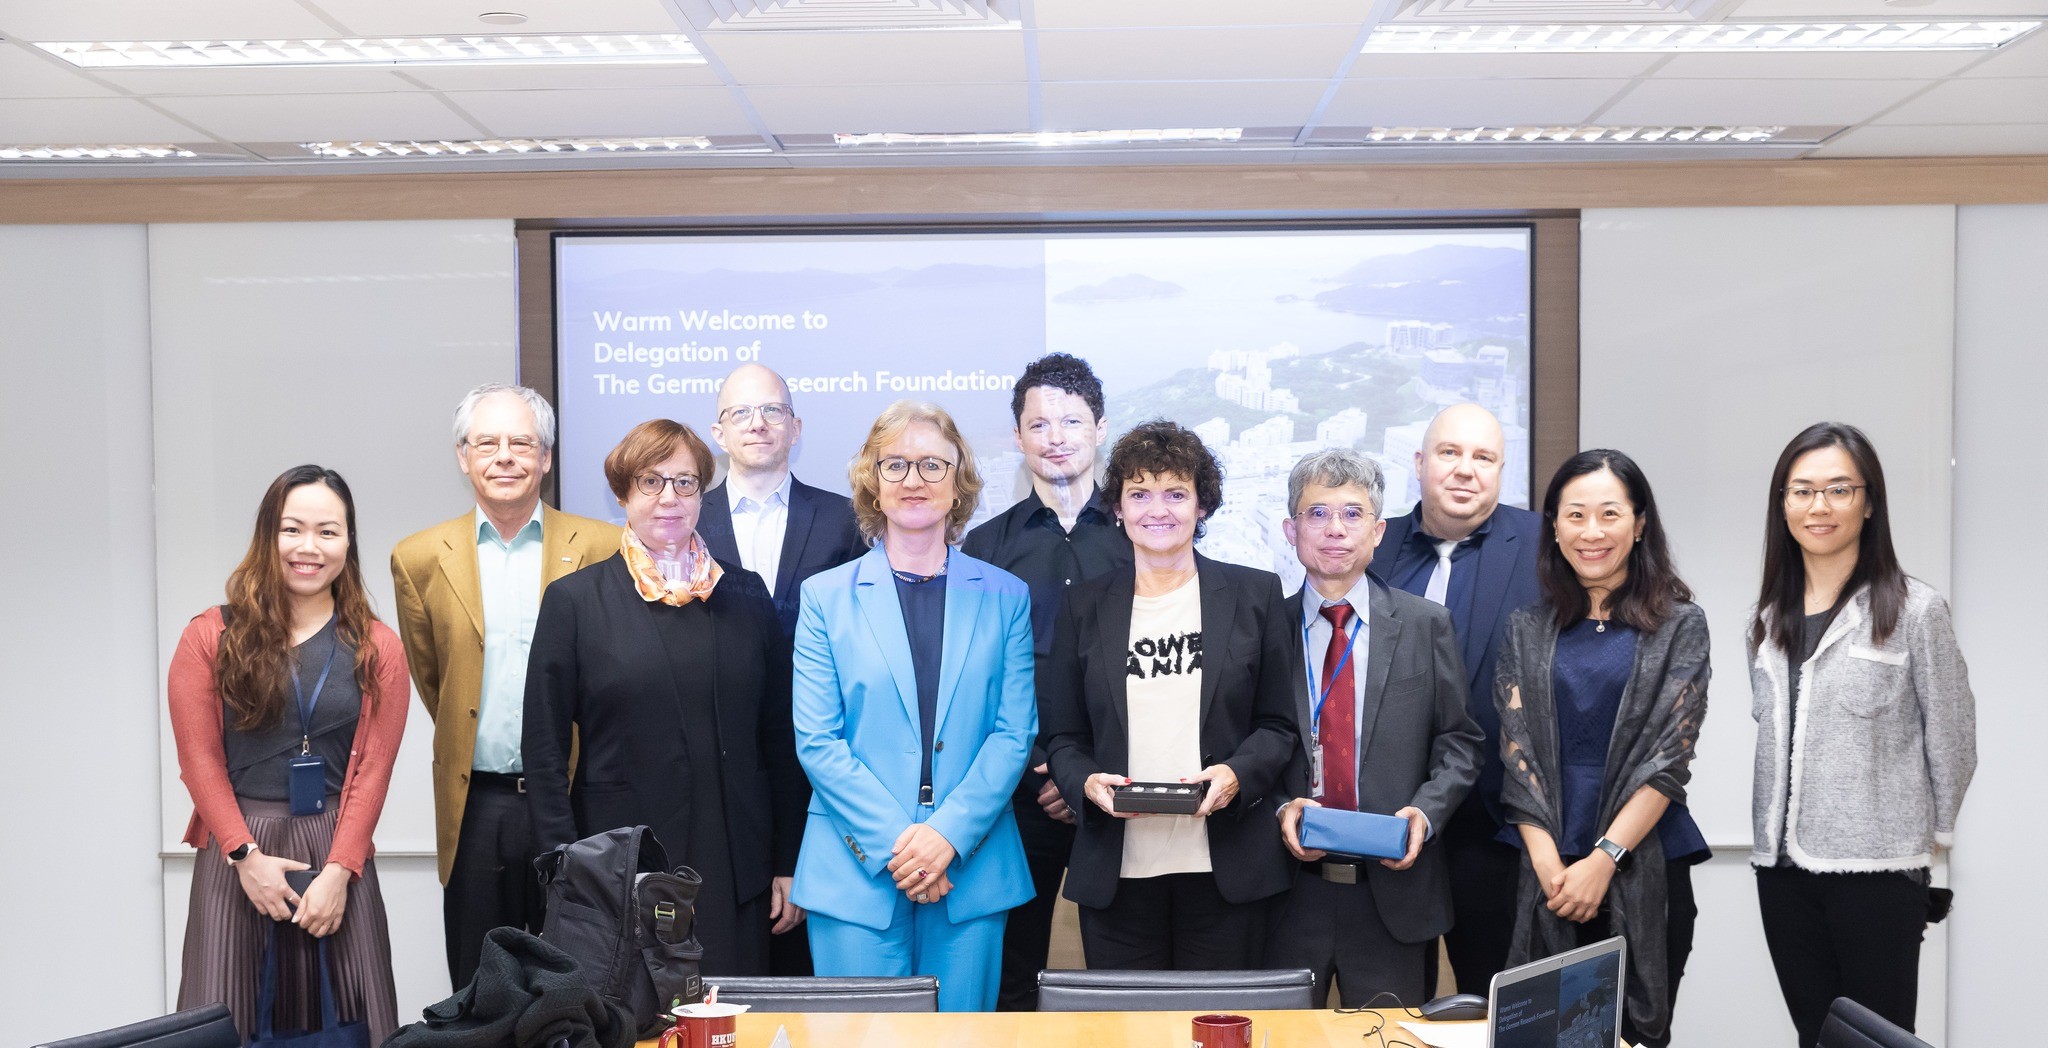 HKUST Associate Vice-President for Research and Development (Research) Prof. CHAN Che Ting (third right, front row), German faculty members Prof. Berthold JÄCK (second right, back row), Prof. Stefan NAGL (first right, back row) and Head of Global Engagement and Greater China Affairs Yvonne LI (second right, front row) engage in a meeting with the German Research Foundation delegation led by Dr. Annette SCHMIDTMANN.